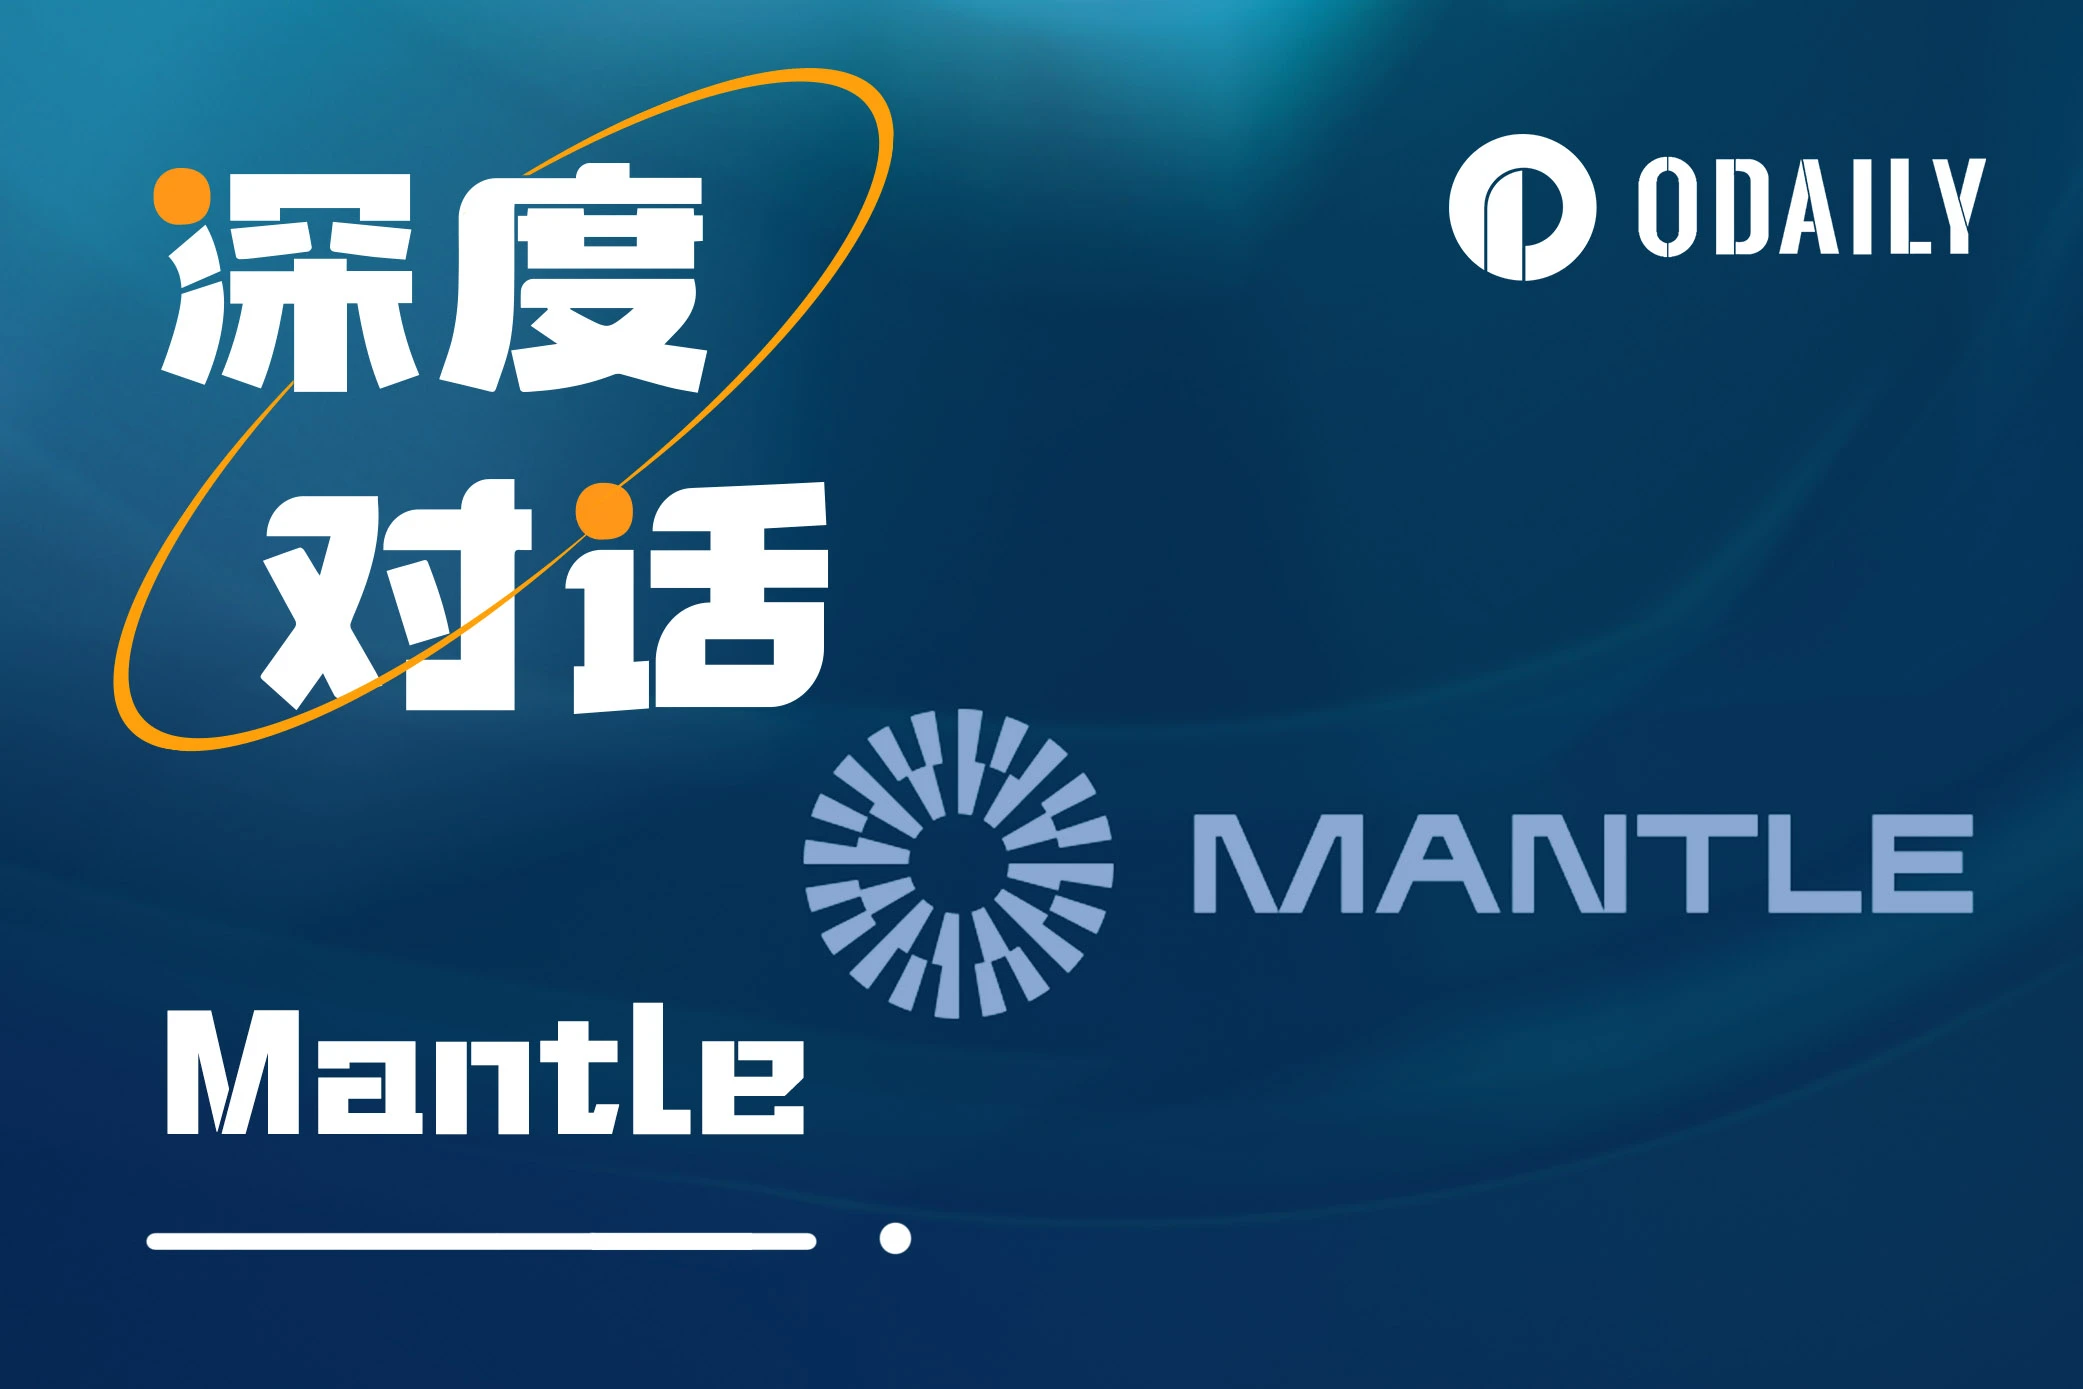 Exclusive interview with Mantle: With the support of BitDAO, how will the emerging Layer 2 grow?